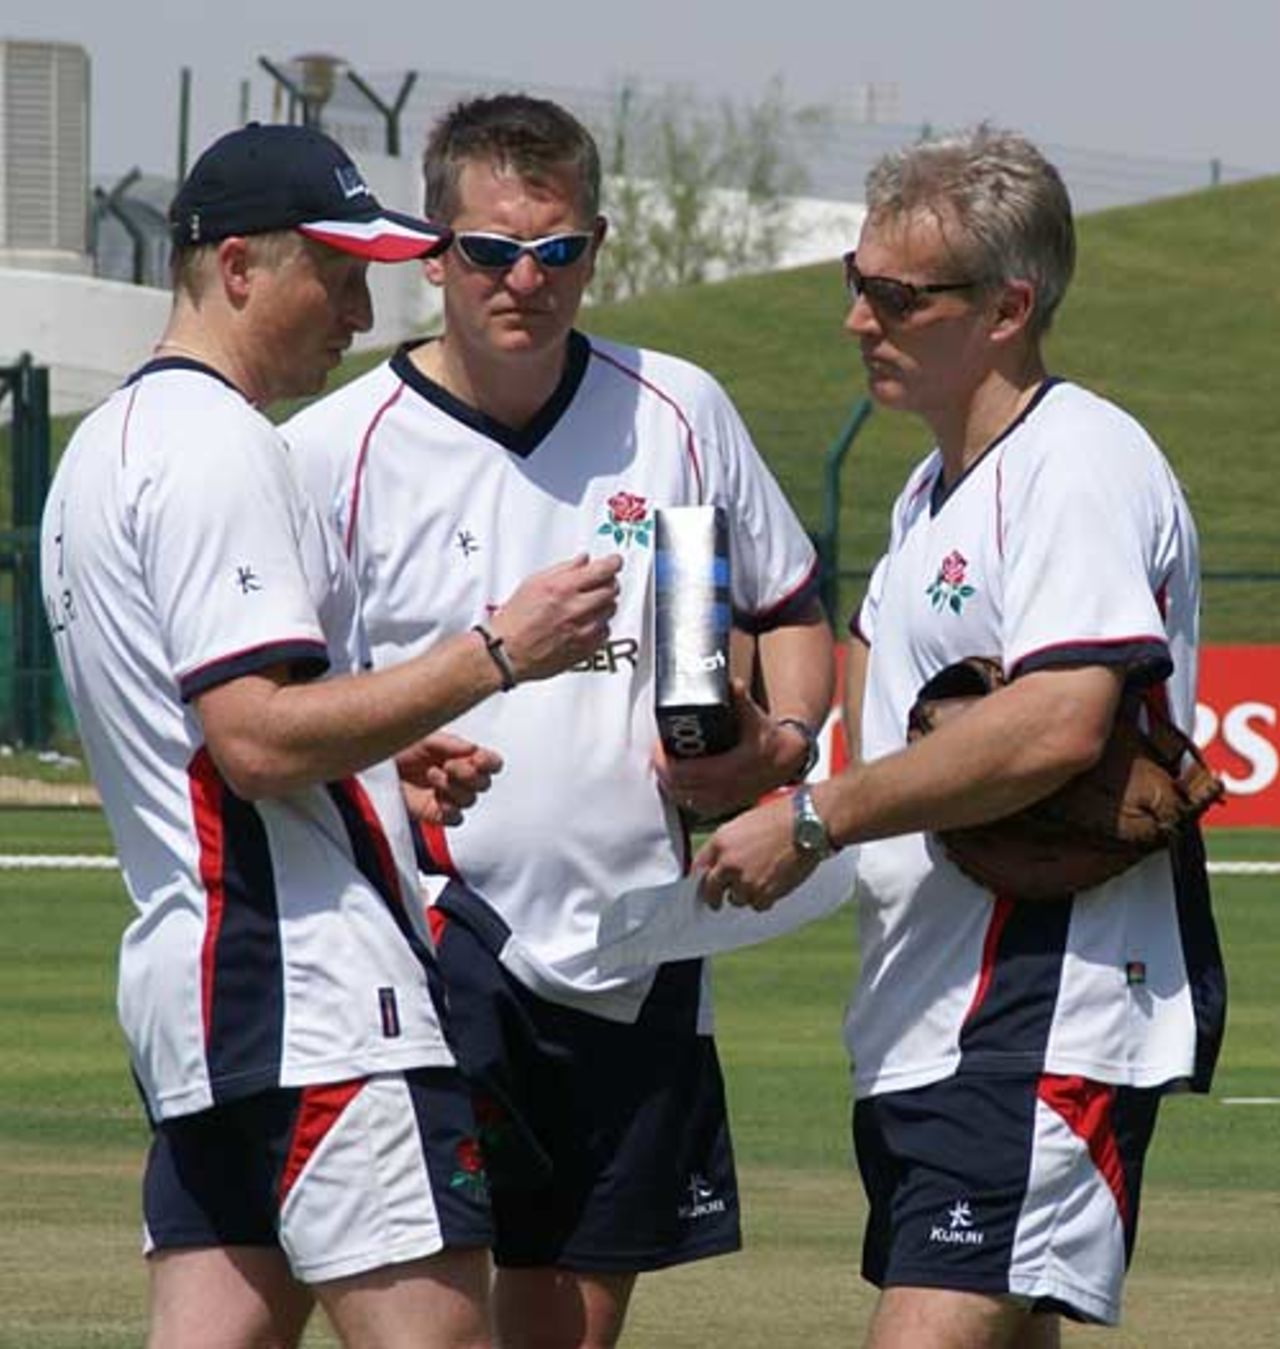 Lancashire's new coach Peter Moores discusses his plans with Glen Chapple and Gary Yates, Lancashire v Sussex, Pro Arch Trophy, Abu Dhabi, March 19, 2009